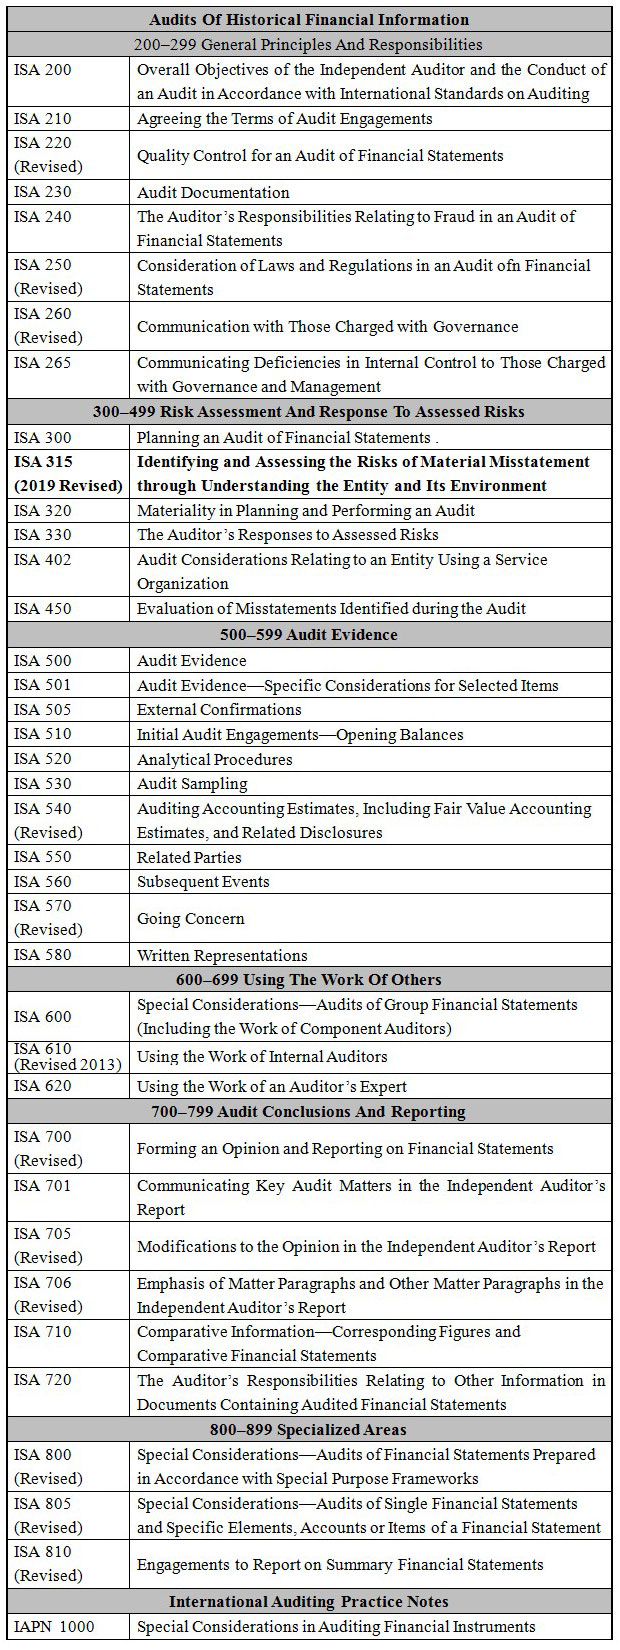 Audits Of Historical Financial Information,200–299 General Principles And Responsibilities,ISA 200,Overall Objectives of the Independent Auditor and the Conduct of an Audit in Accordance with International Standards on Auditing,ISA 210,Agreeing the Terms of Audit Engagements,ISA 220,(Revised),Quality Control for an Audit of Financial Statements,ISA 230,Audit Documentation,ISA 240,The Auditor’s Responsibilities Relating to Fraud in an Audit of Financial Statements,ISA 250,(Revised),Consideration of Laws and Regulations in an Audit ofn Financial Statements,ISA 260 (Revised),Communication with Those Charged with Governance,ISA 265,Communicating Deficiencies in Internal Control to Those Charged with Governance and Management,300–499 Risk Assessment And Response To Assessed Risks,ISA 300,Planning an Audit of Financial Statements.,ISA 315,(2019 Revised),Identifying and Assessing the Risks of Material Misstatement through Understanding the Entity and Its Environment,ISA 320,Materiality in Planning and Performing an Audit,ISA 330,The Auditor’s Responses to Assessed Risks,ISA 402,Audit Considerations Relating to an Entity Using a Service Organization,ISA 450,Evaluation of Misstatements Identified during the Audit,500–599 Audit Evidence,ISA 500,Audit Evidence,ISA 501,Audit Evidence—Specific Considerations for Selected Items,ISA 505,External Confirmations,ISA 510,Initial Audit Engagements—Opening Balances,ISA 520,Analytical Procedures, ISA 530,Audit Sampling,ISA 540,(Revised),Auditing Accounting Estimates, Including Fair Value Accounting Estimates, and Related Disclosures,ISA 550,Related Parties,ISA 560,Subsequent Events,ISA 570 (Revised),Going Concern,ISA 580,Written Representations,600–699 Using The Work Of Others,ISA 600,Special Considerations—Audits of Group Financial Statements (Including the Work of Component Auditors),ISA 610 (Revised 2013),Using the Work of Internal Auditors,ISA 620,Using the Work of an Auditor’s Expert,700–799 Audit Conclusions And Reporting,ISA 700 (Revised),Forming an Opinion and Reporting on Financial Statements,ISA 701,Communicating Key Audit Matters in the Independent Auditor’s Report,ISA 705 (Revised),Modifications to the Opinion in the Independent Auditor’s Report,ISA 706 (Revised),Emphasis of Matter Paragraphs and Other Matter Paragraphs in the Independent Auditor’s Report,ISA 710,Comparative Information—Corresponding Figures and Comparative Financial Statements,ISA 720,The Auditor’s Responsibilities Relating to Other Information in Documents Containing Audited Financial Statements,800–899 Specialized Areas,ISA 800 (Revised),Special Considerations—Audits of Financial Statements Prepared in Accordance with Special Purpose Frameworks,ISA 805 (Revised),Special Considerations—Audits of Single Financial Statements and Specific Elements, Accounts or Items of a Financial Statement,ISA 810 (Revised),Engagements to Report on Summary Financial Statements,International Auditing Practice Notes,IAPN 1000,Special Considerations in Auditing Financial Instruments